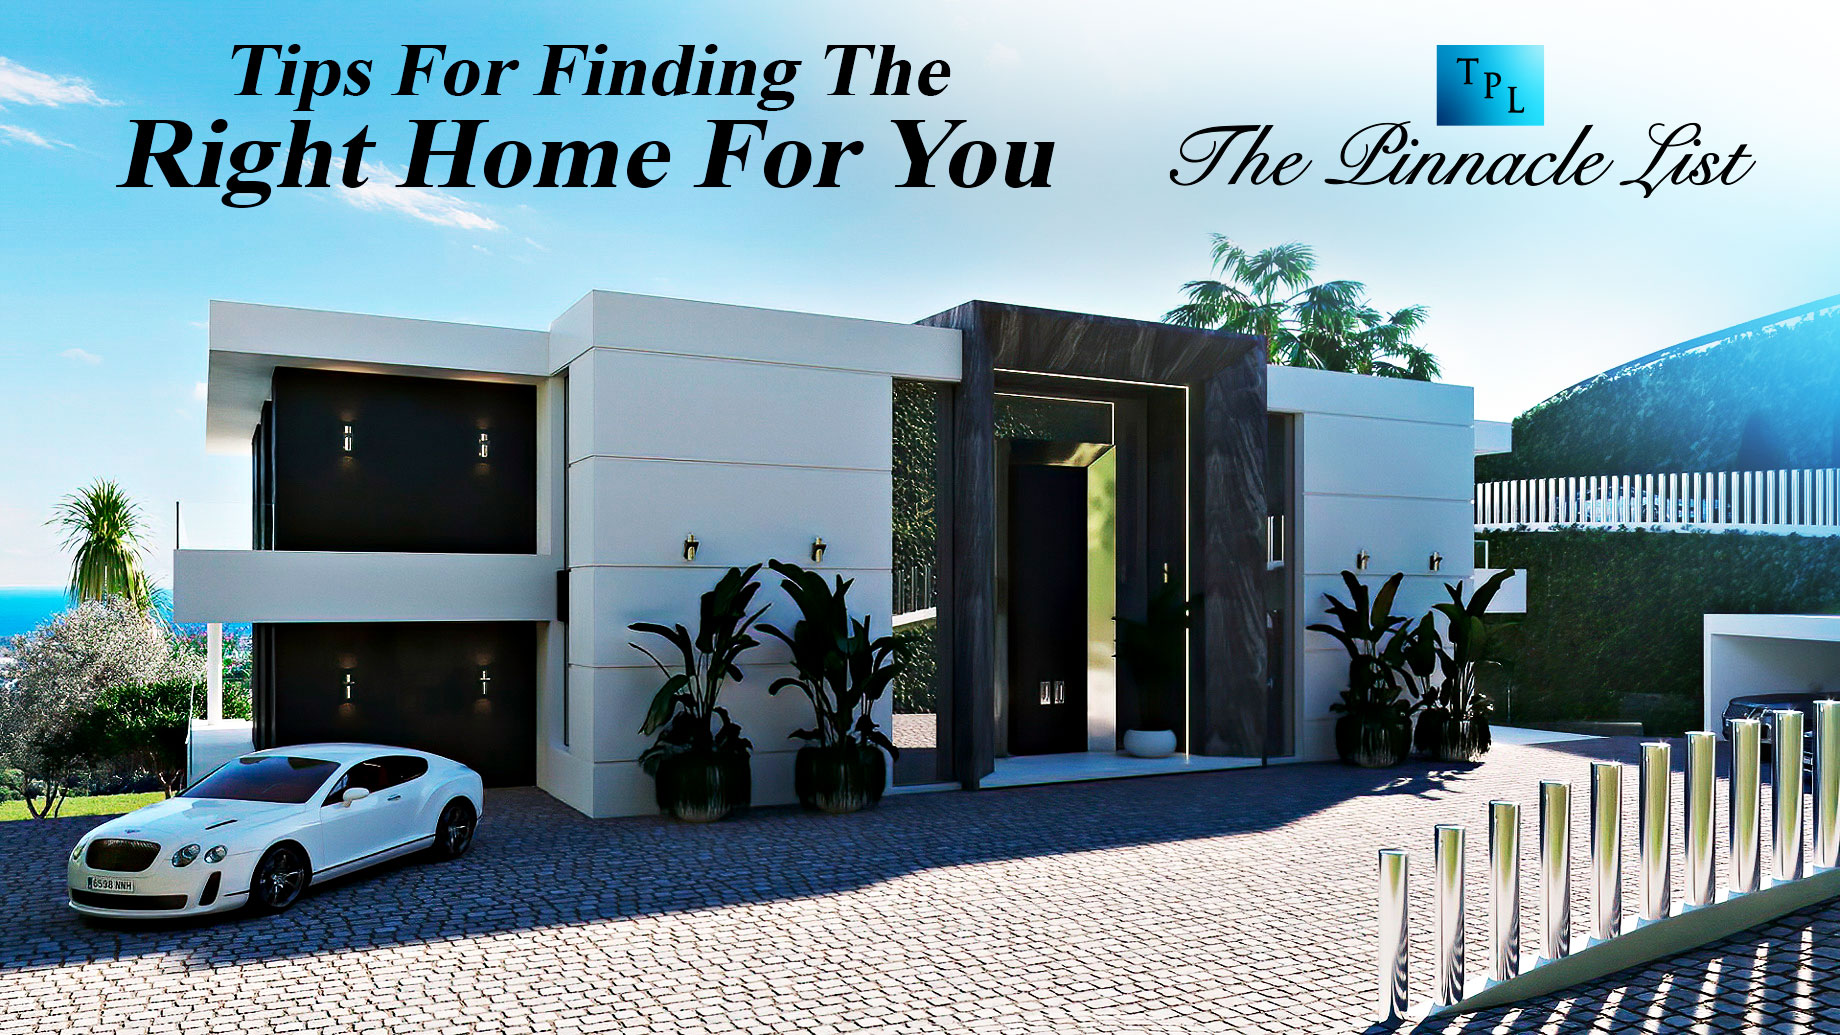 Tips For Finding The Right Home For You